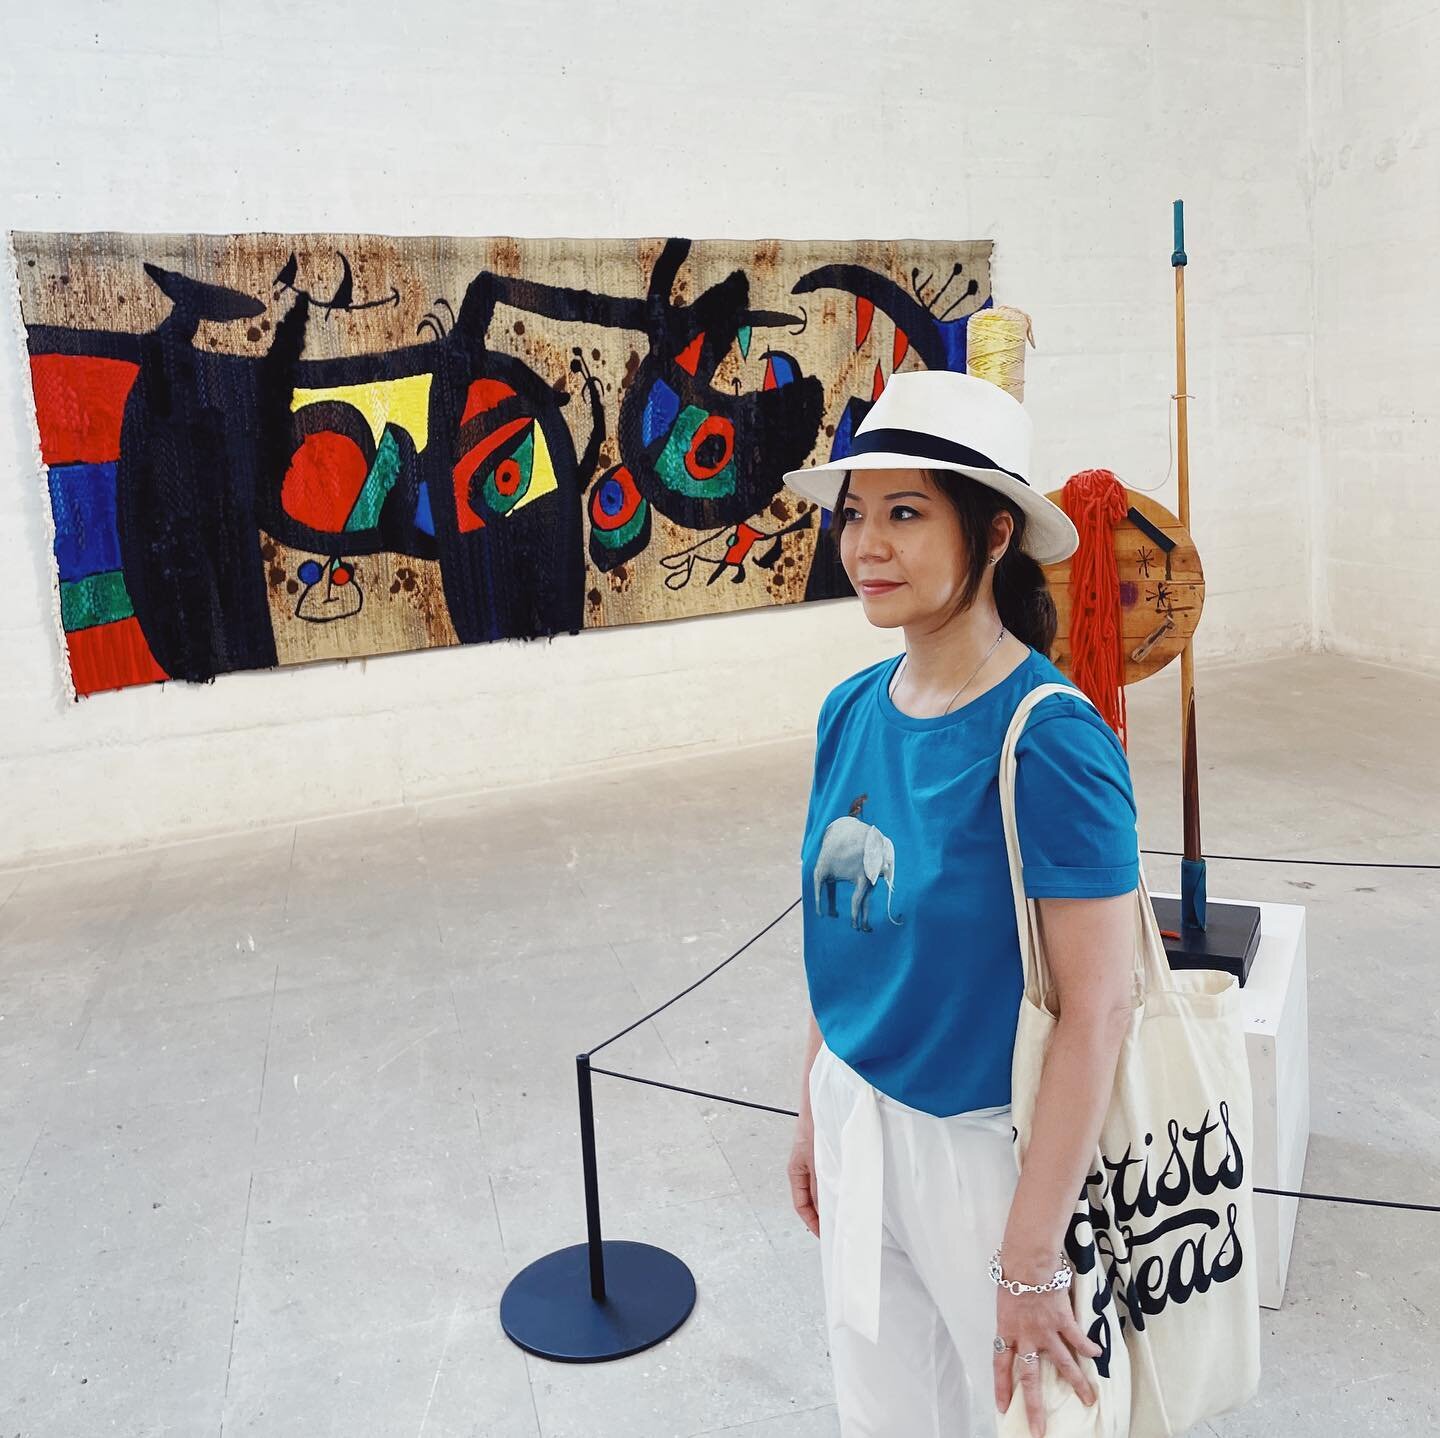 KA-art immersion! First time taking KA! Kanna Chews while experiencing Mir&oacute;&rsquo;s art and workshop at Fundaci&oacute; Mir&oacute; Mallorca.

Receiving over perceiving; channeling instead of analyzing. Siendo, se sintiendo. 

🌊
@ka.empathoge